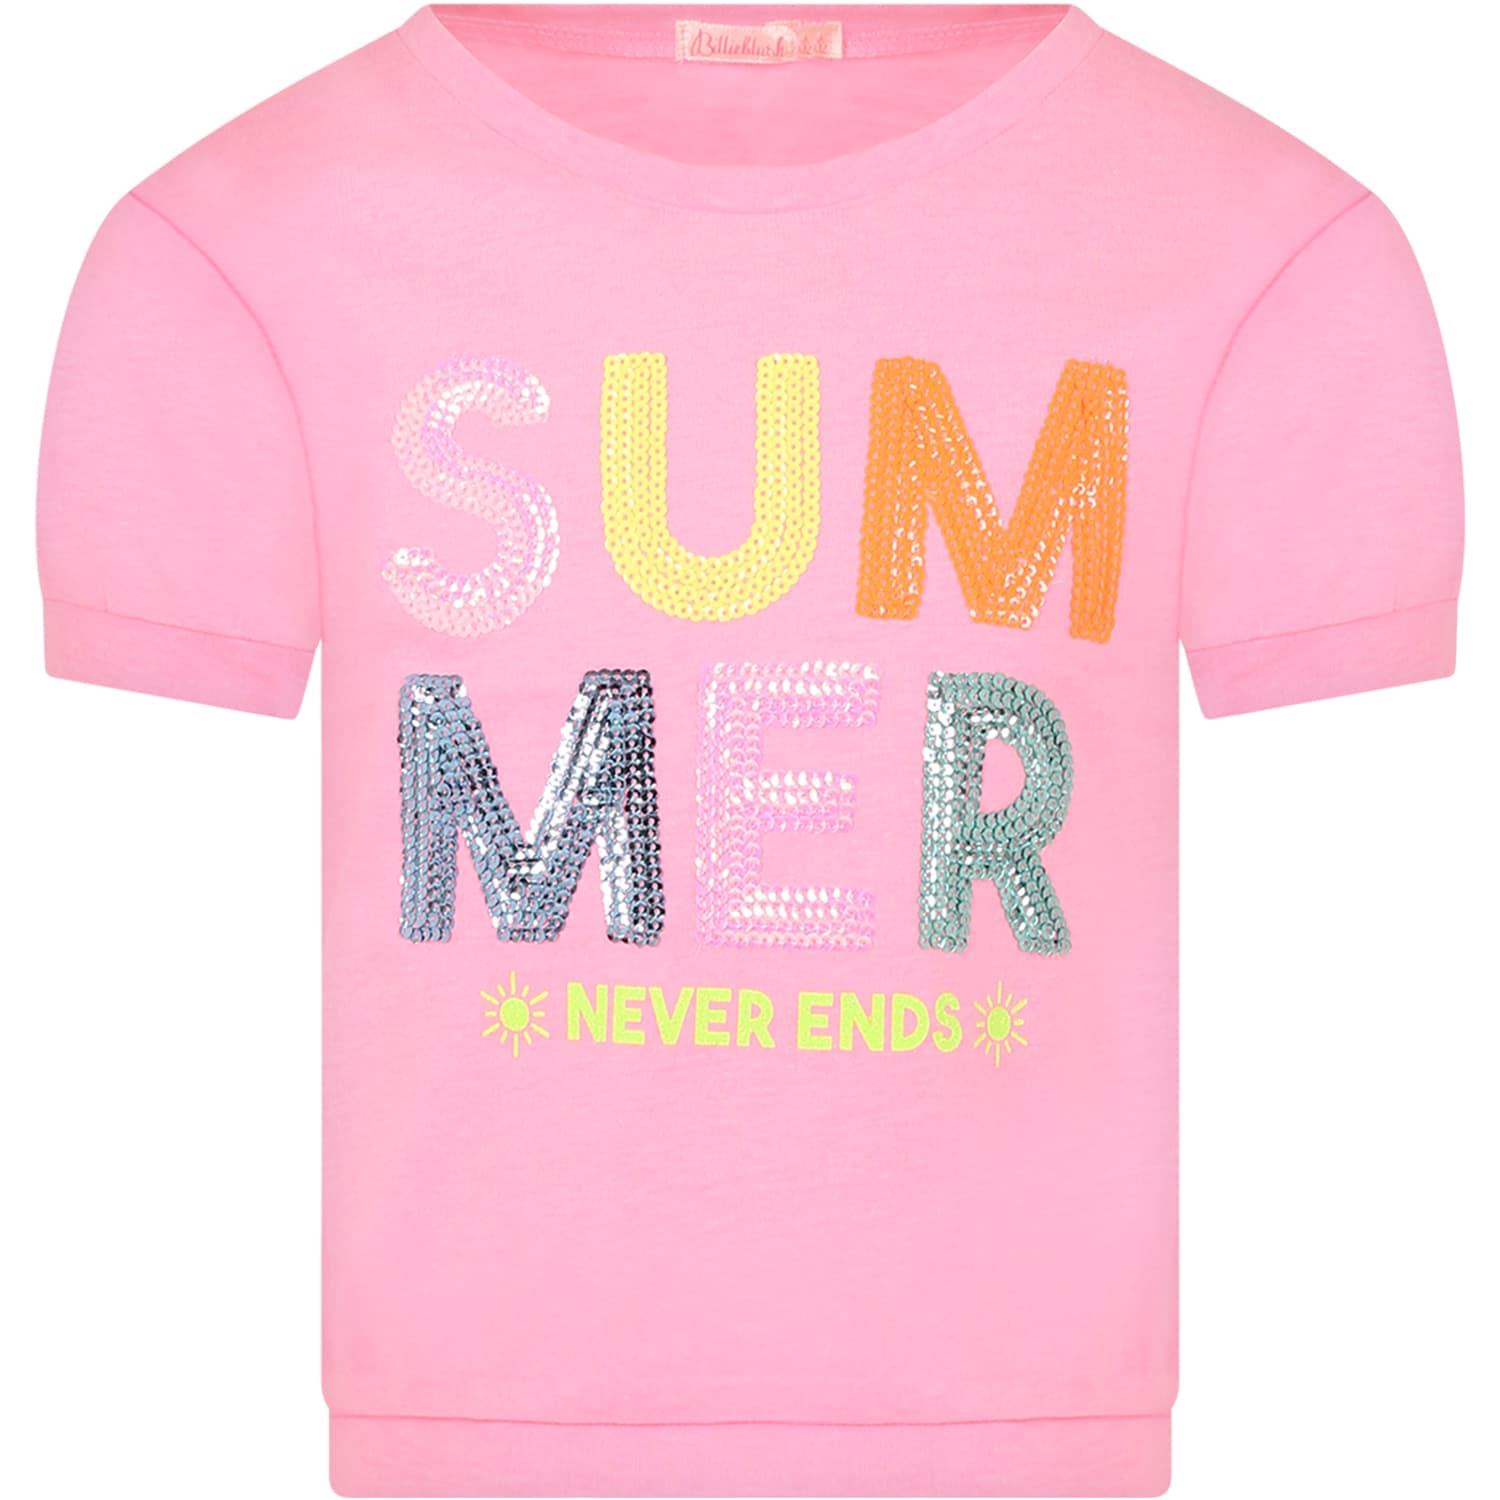 Billieblush Kids' Pink T-shirt For Girl With Sequins